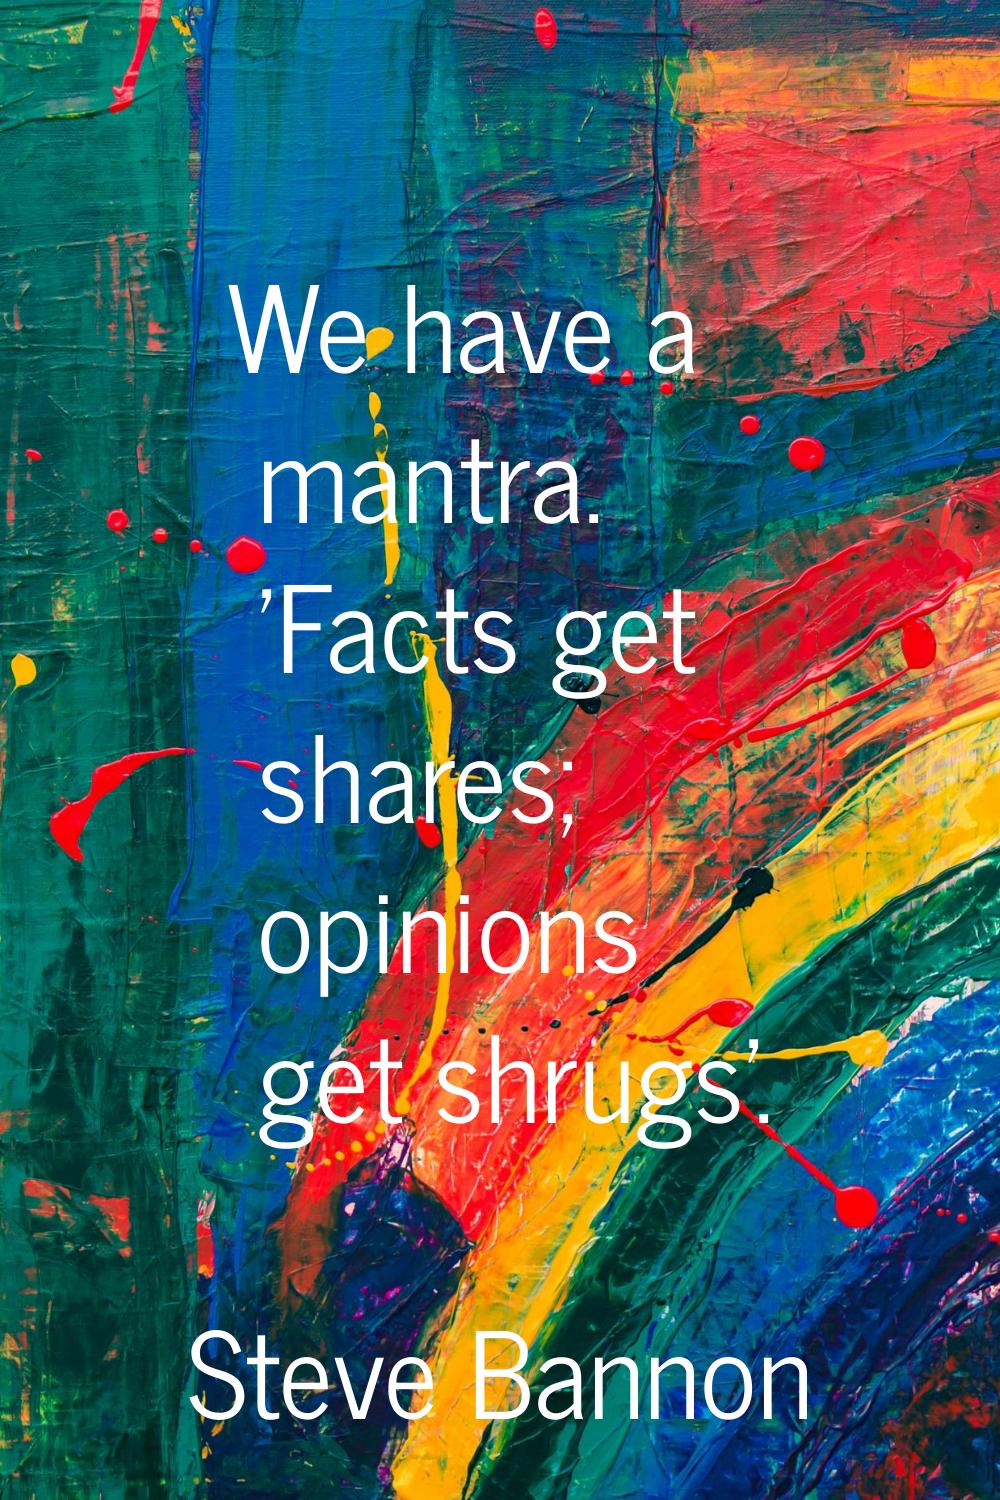 We have a mantra. 'Facts get shares; opinions get shrugs'.